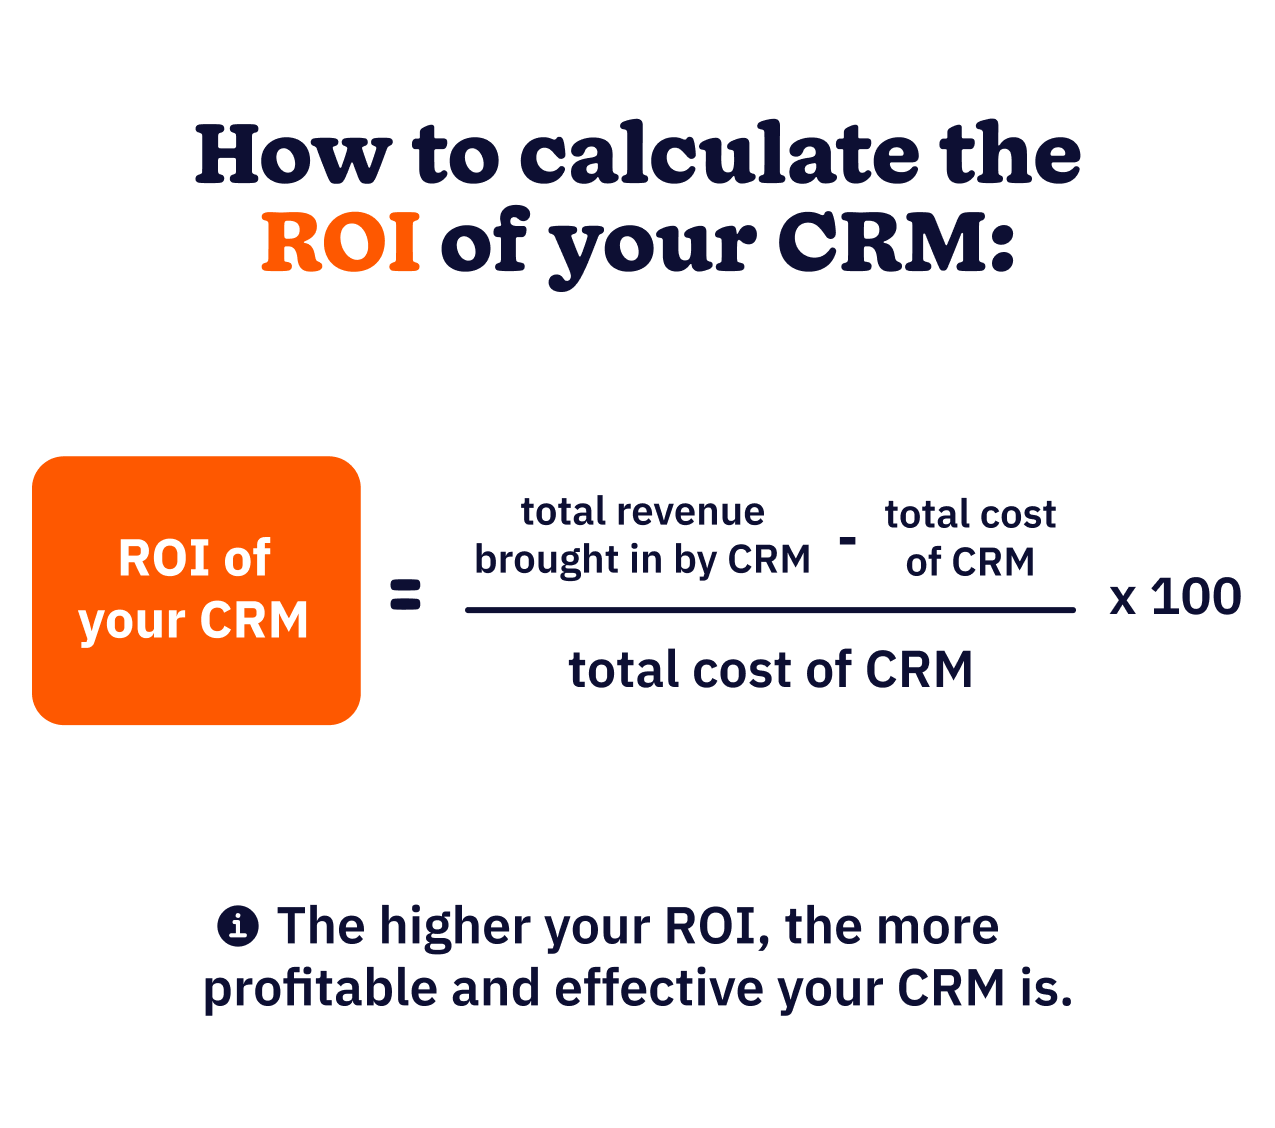 How to calculate the ROI of your CRM